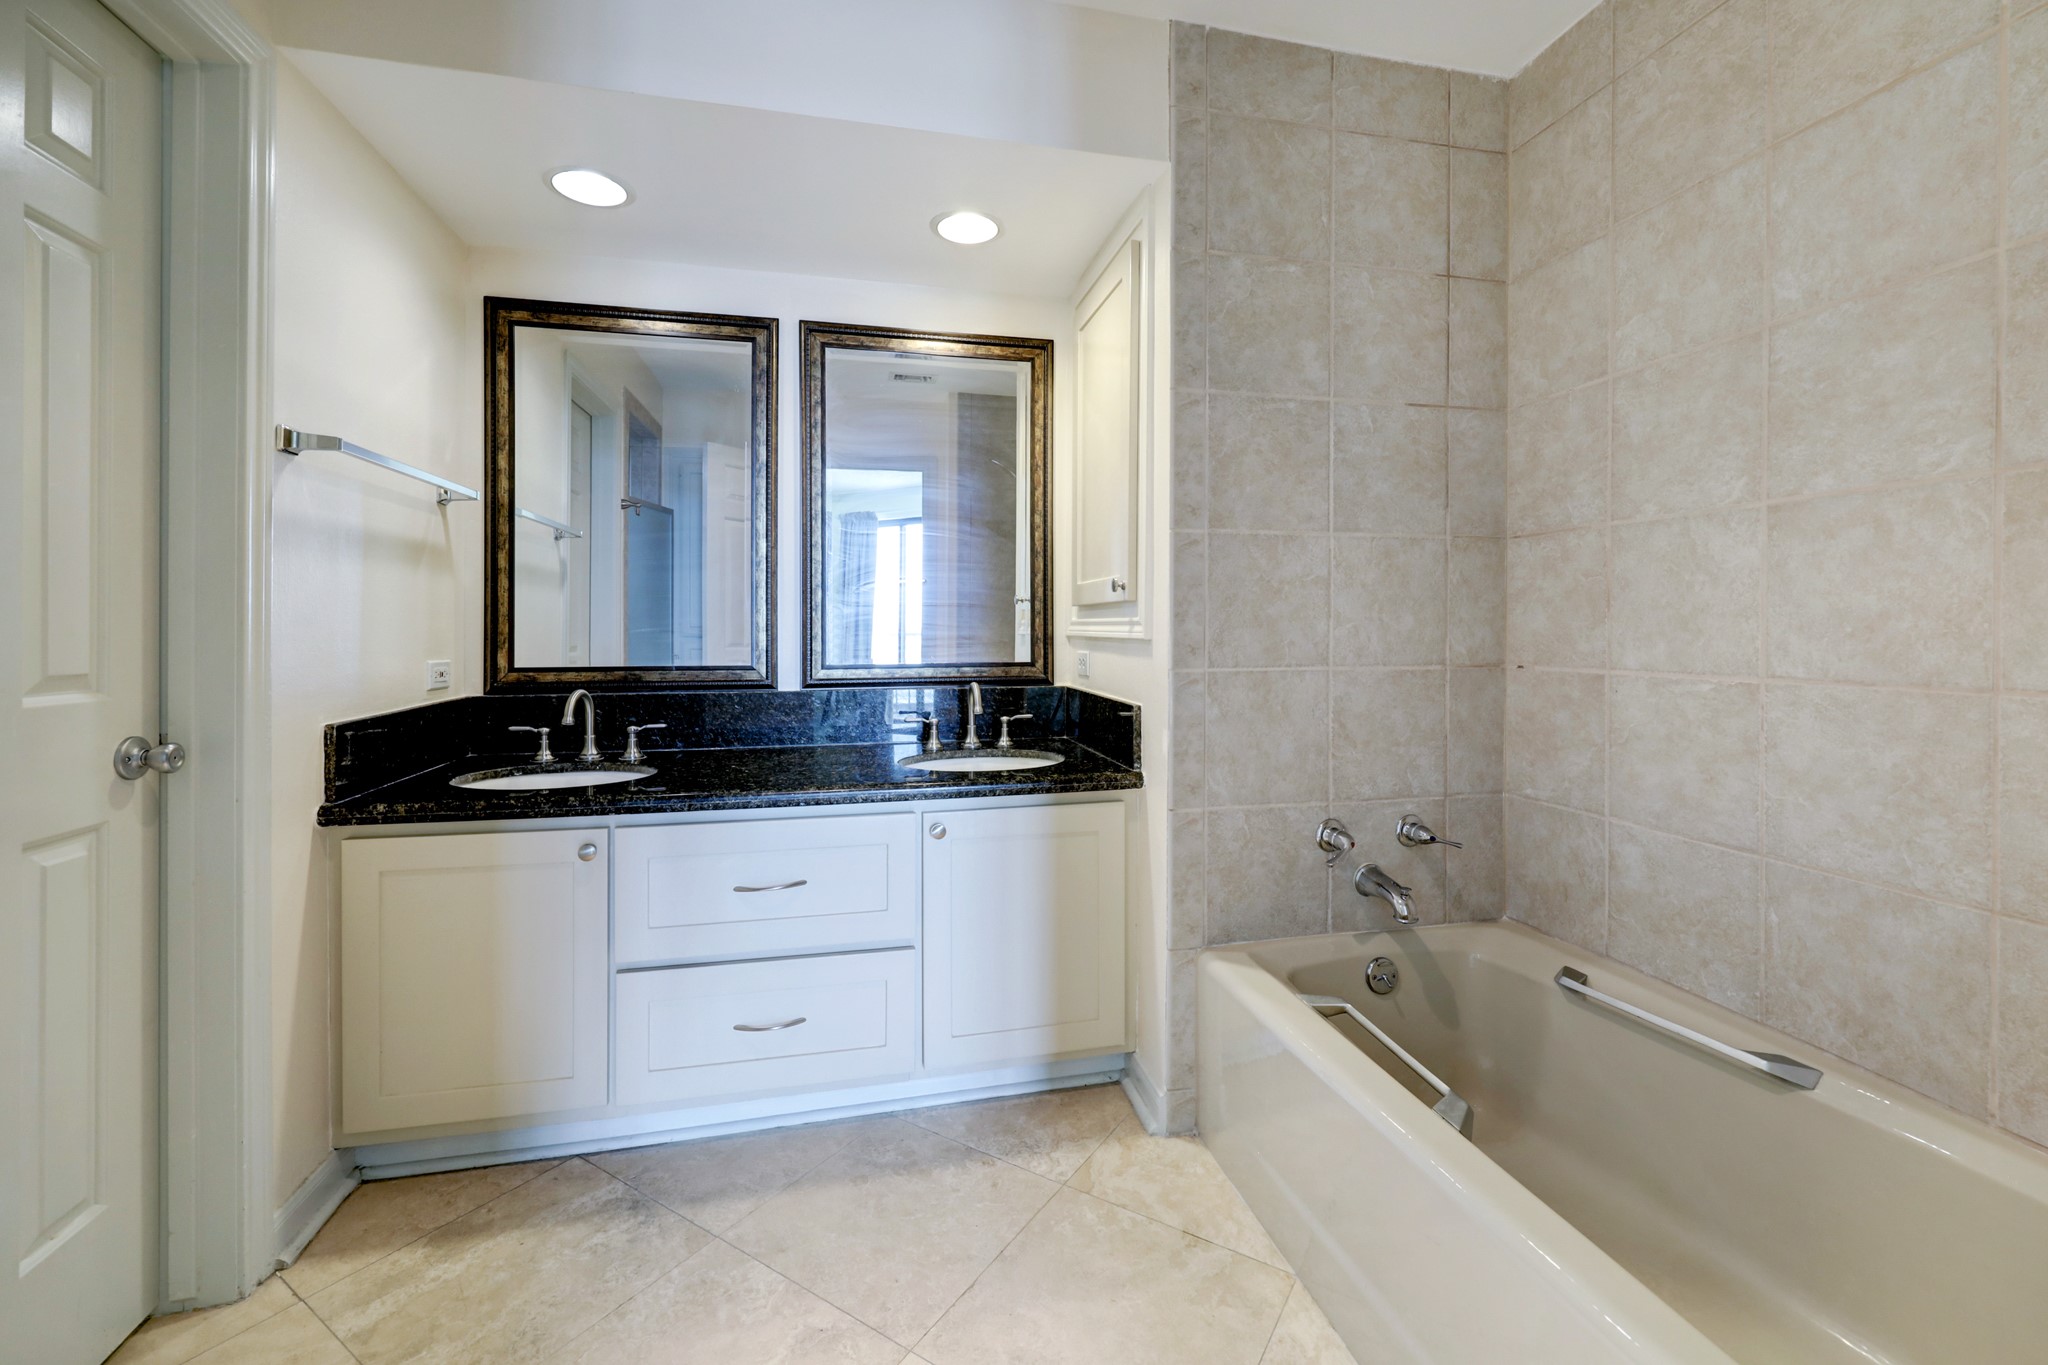 The ensuite primary bath features two sinks, separate shower and tub, and a separate water closet room. Plenty of cabinet space plus a separate linen closet.